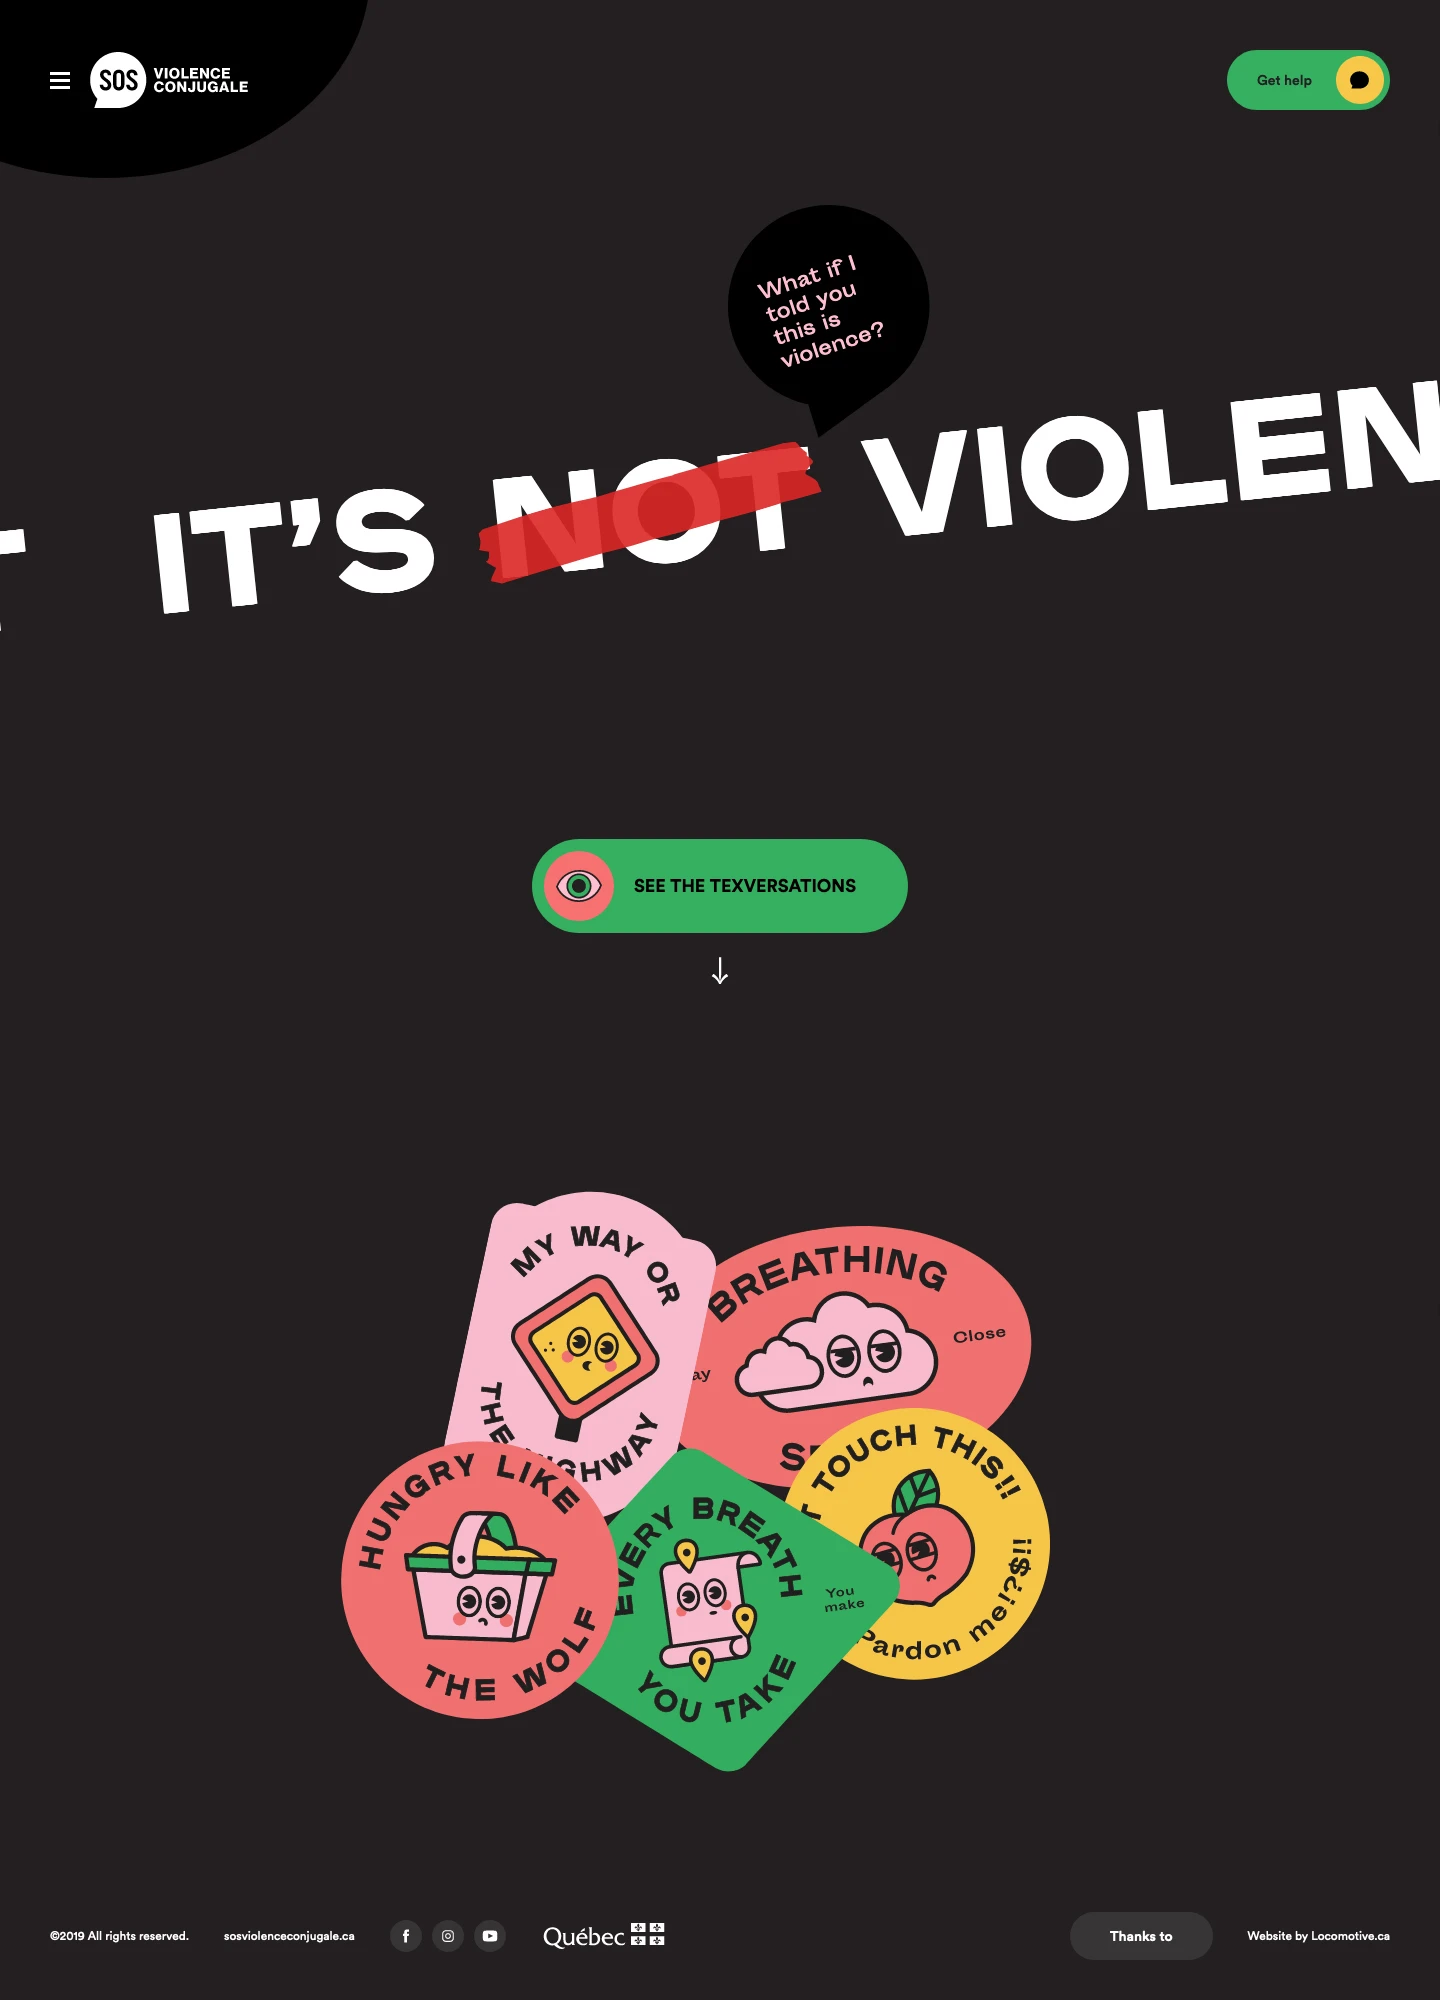 It's n̶o̶t̶ violent Landing Page Example: What if I told you this is violence? Click to discover a textversation that goes too far.